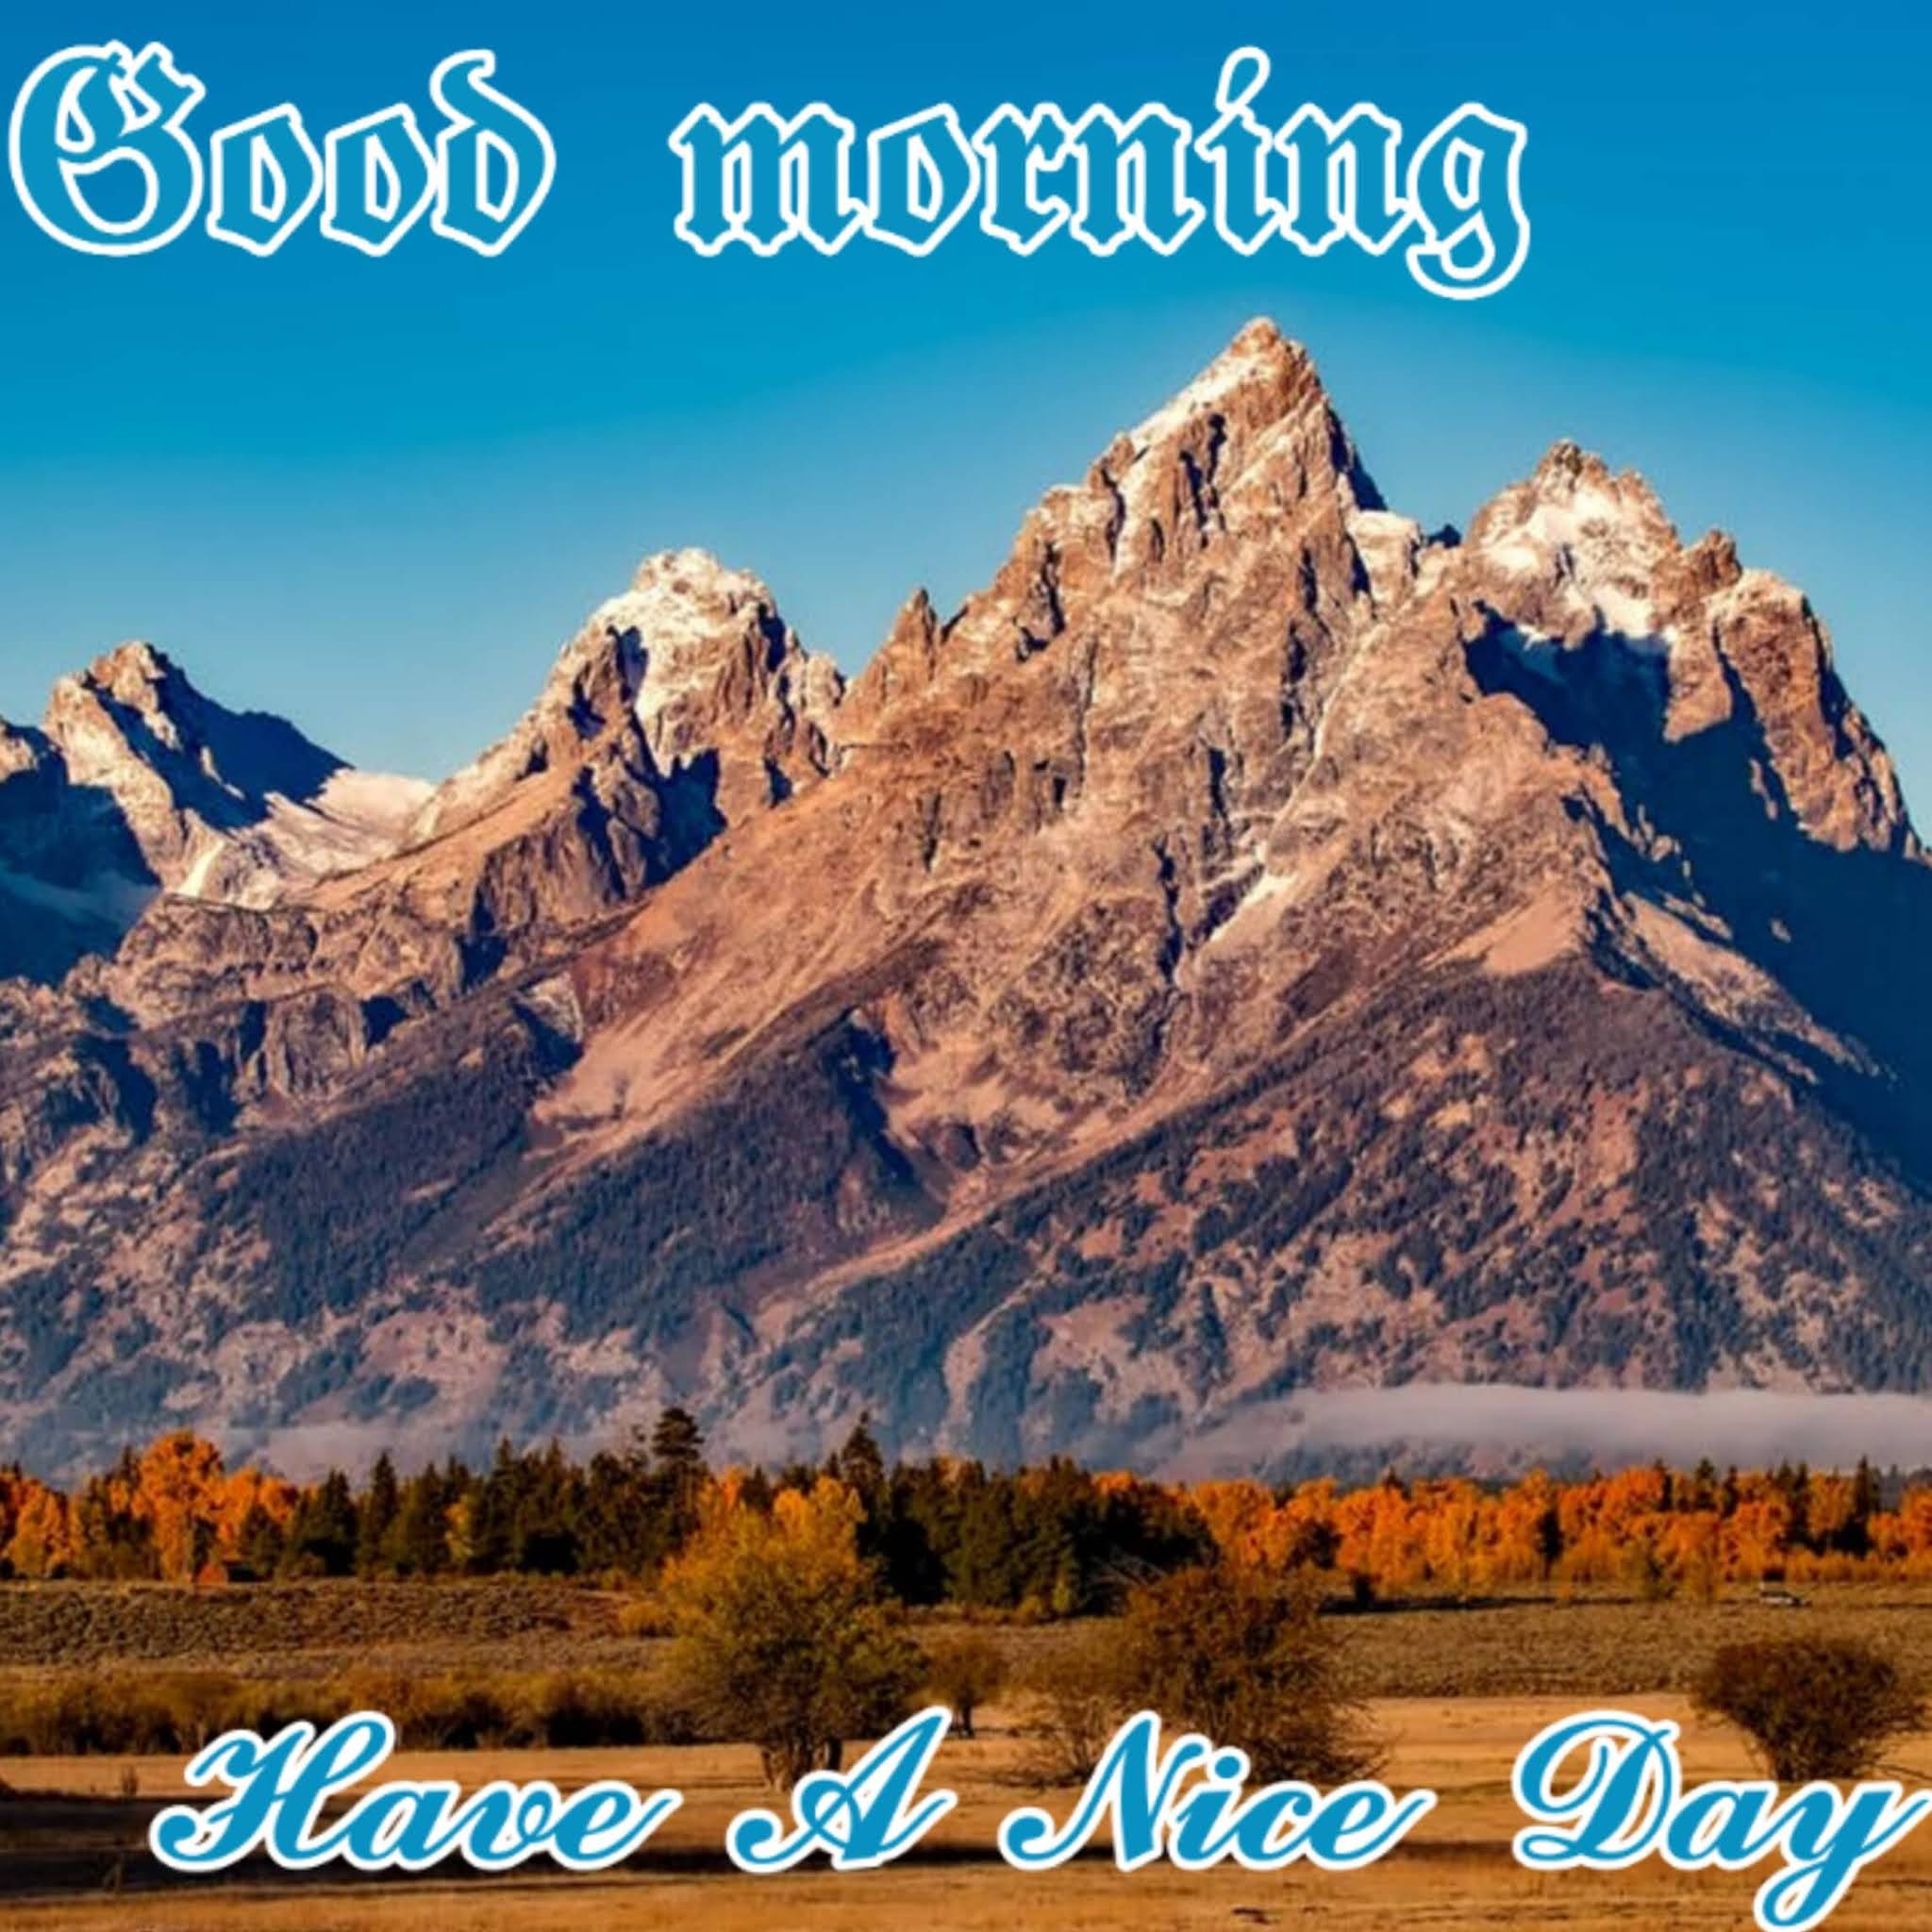 good morning have a nice day image wishes image